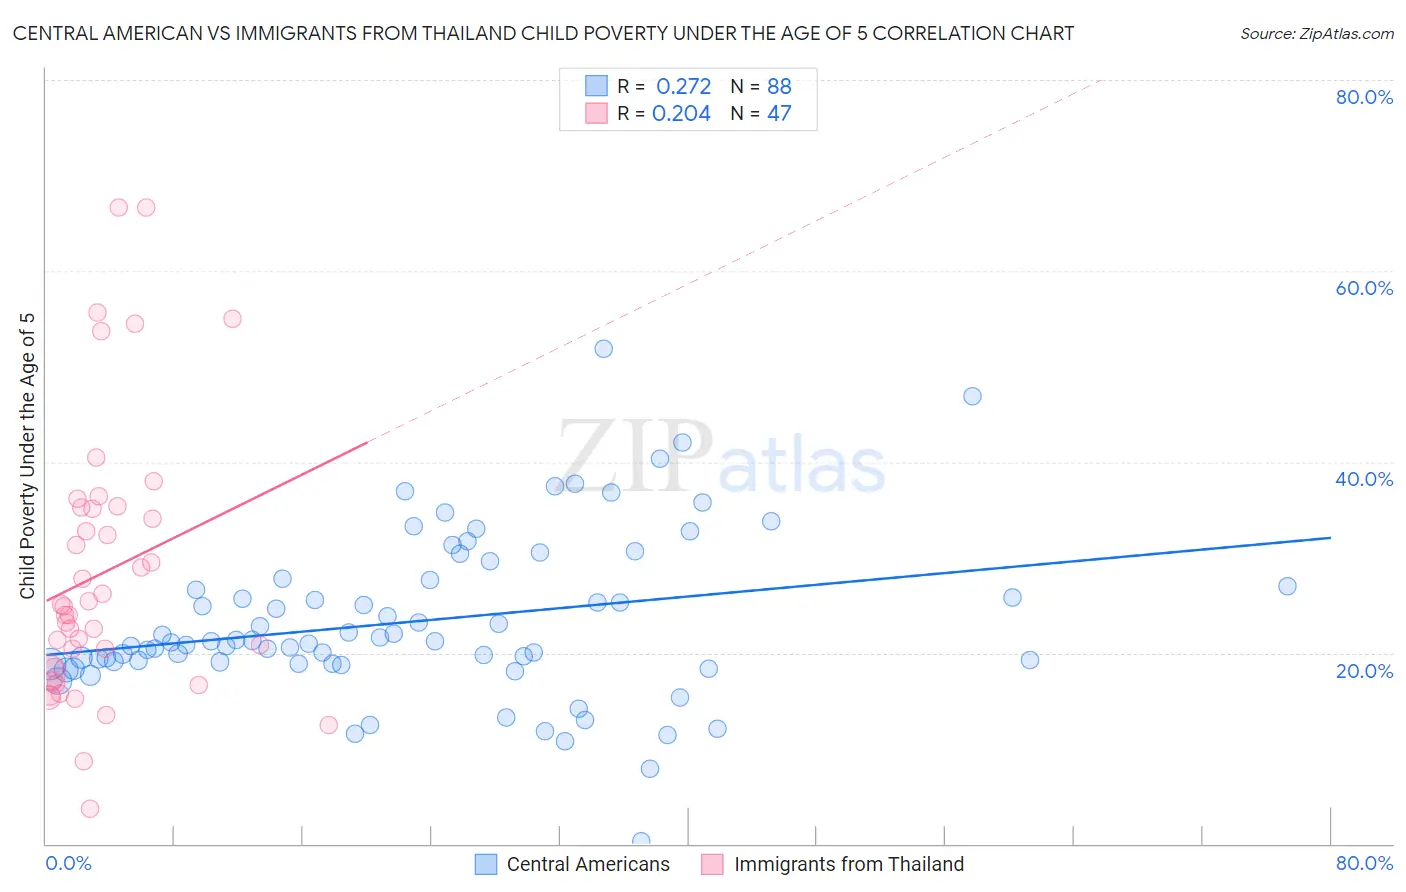 Central American vs Immigrants from Thailand Child Poverty Under the Age of 5